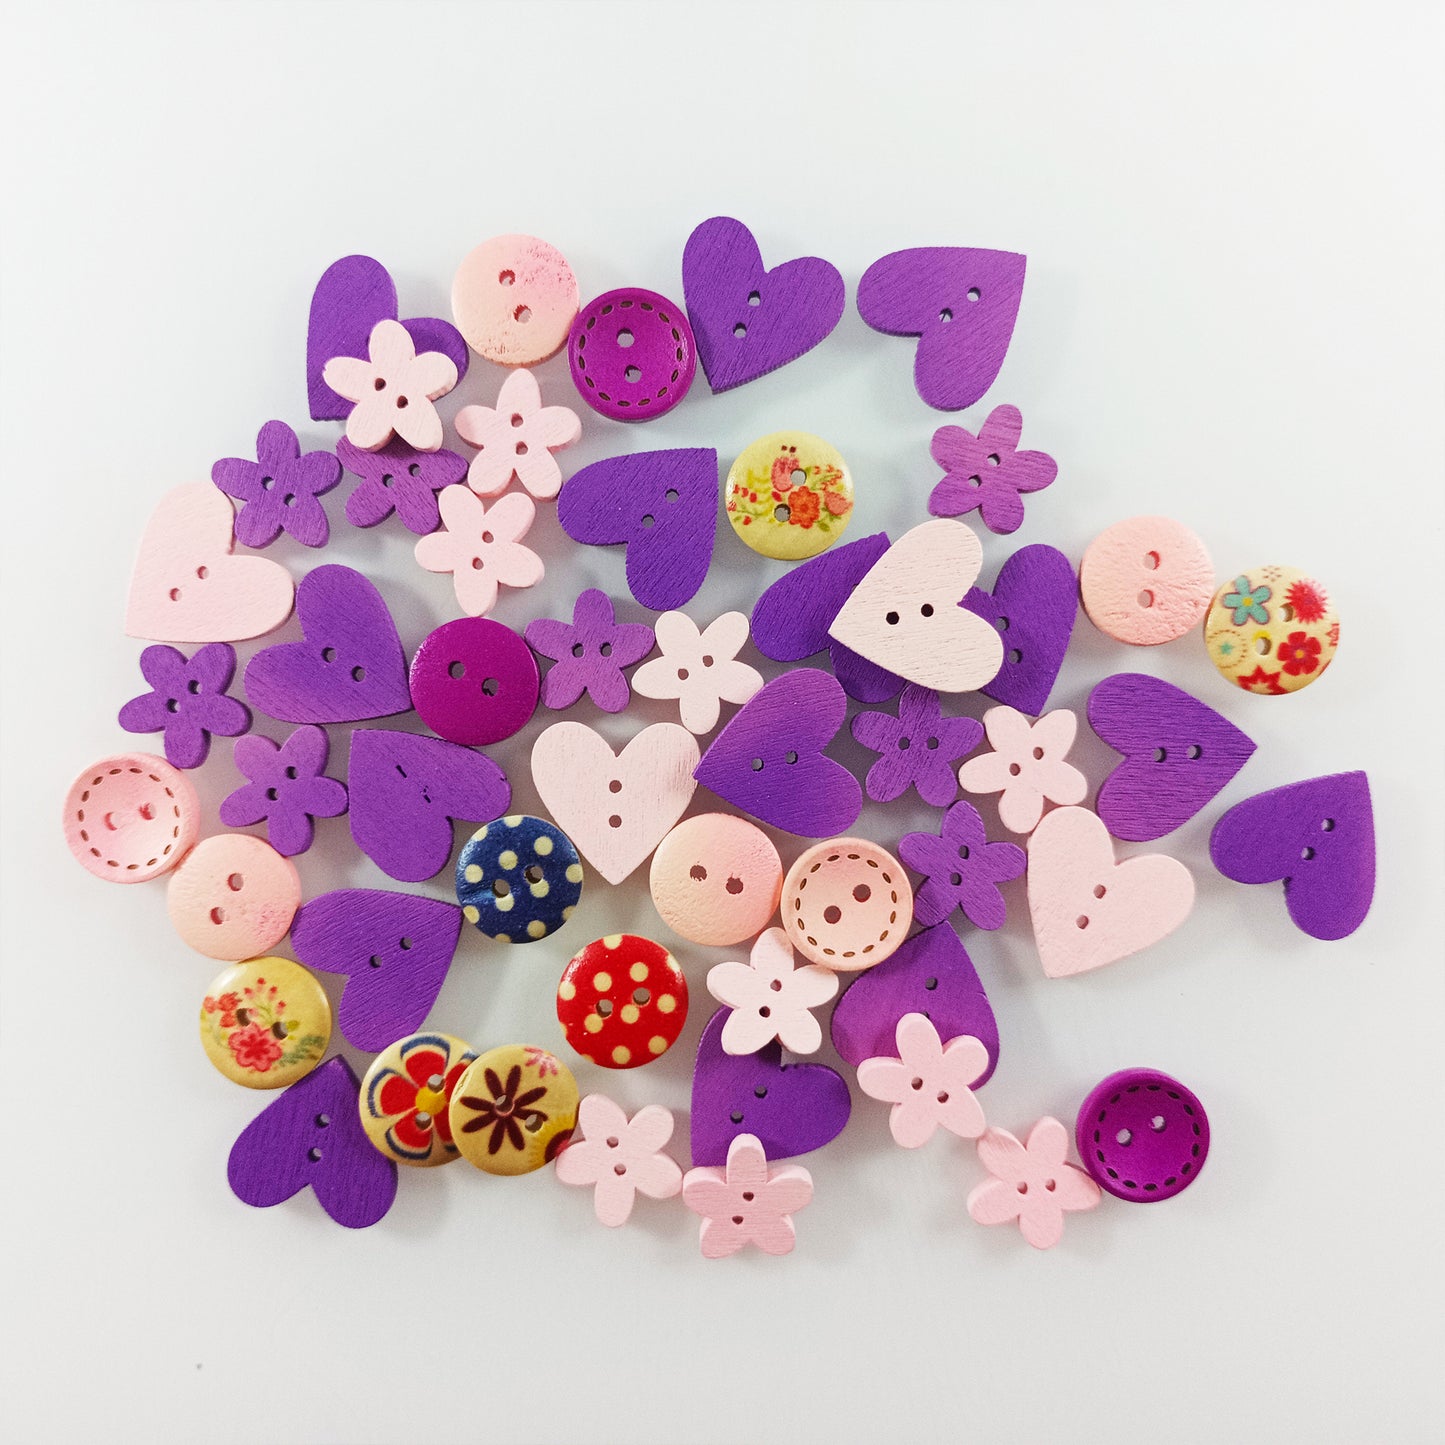 50pcs 10-25mm Flower Heart Shape Wooden Buttons Crafts 2 Hole Sewing Purple Pink